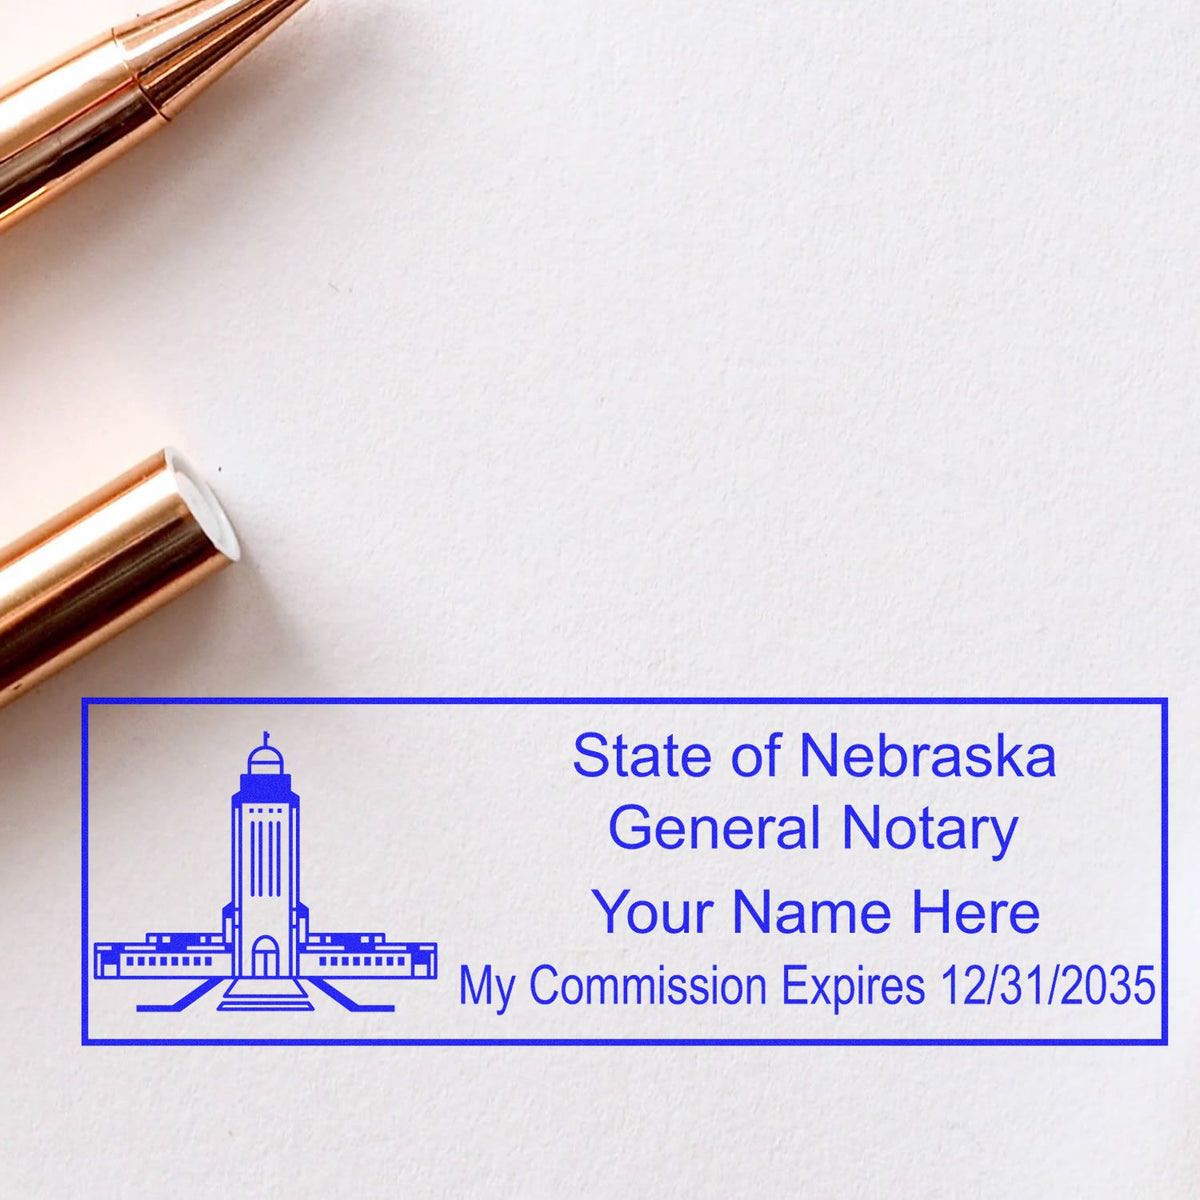 An alternative view of the Super Slim Nebraska Notary Public Stamp stamped on a sheet of paper showing the image in use